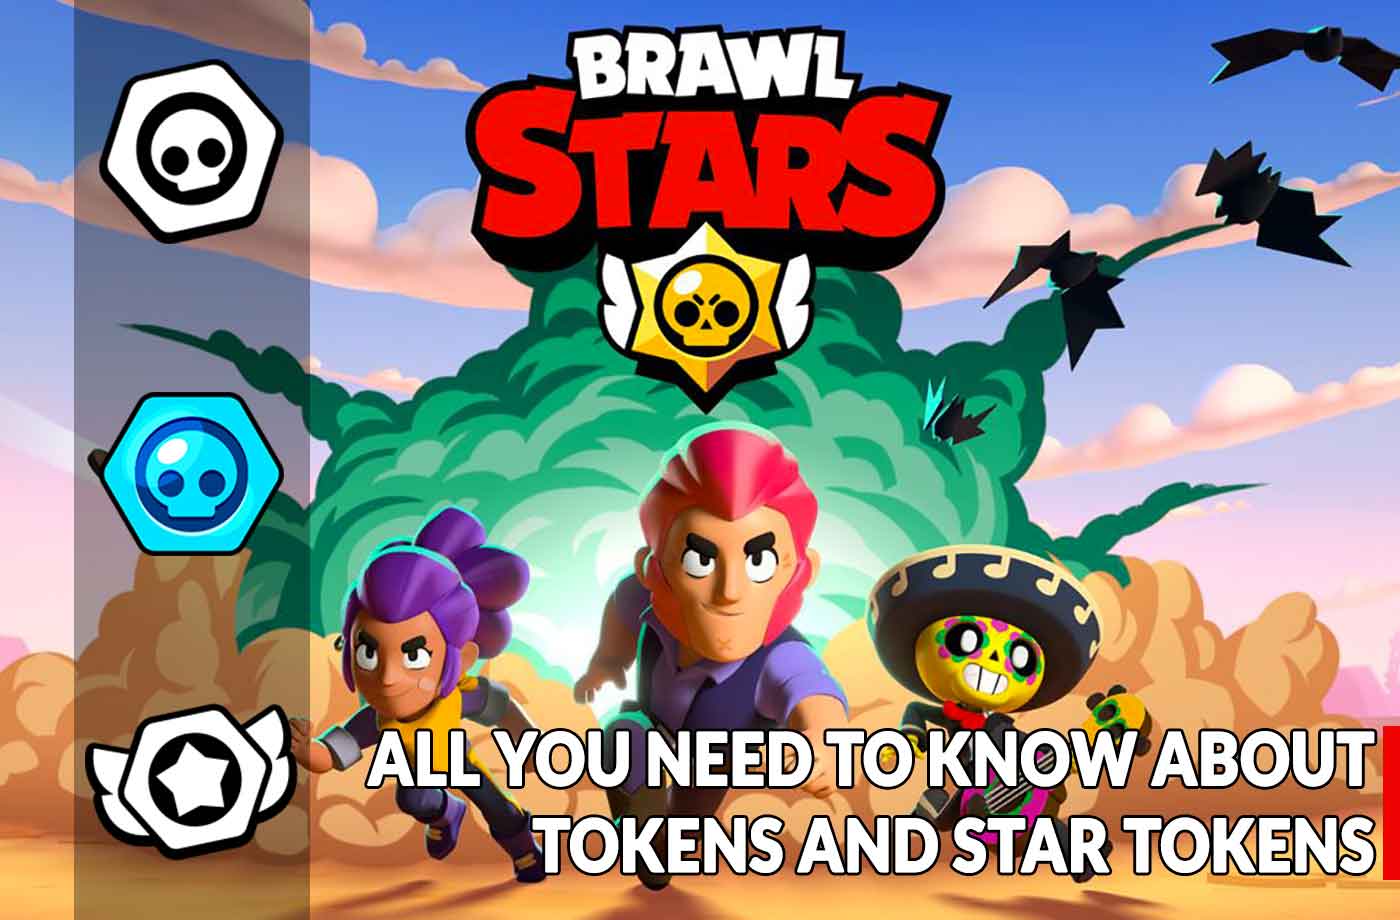 Guide Brawl Stars How To Quickly Gain Tokens And Star Tokens Kill The Game - all.commands in brawl stars